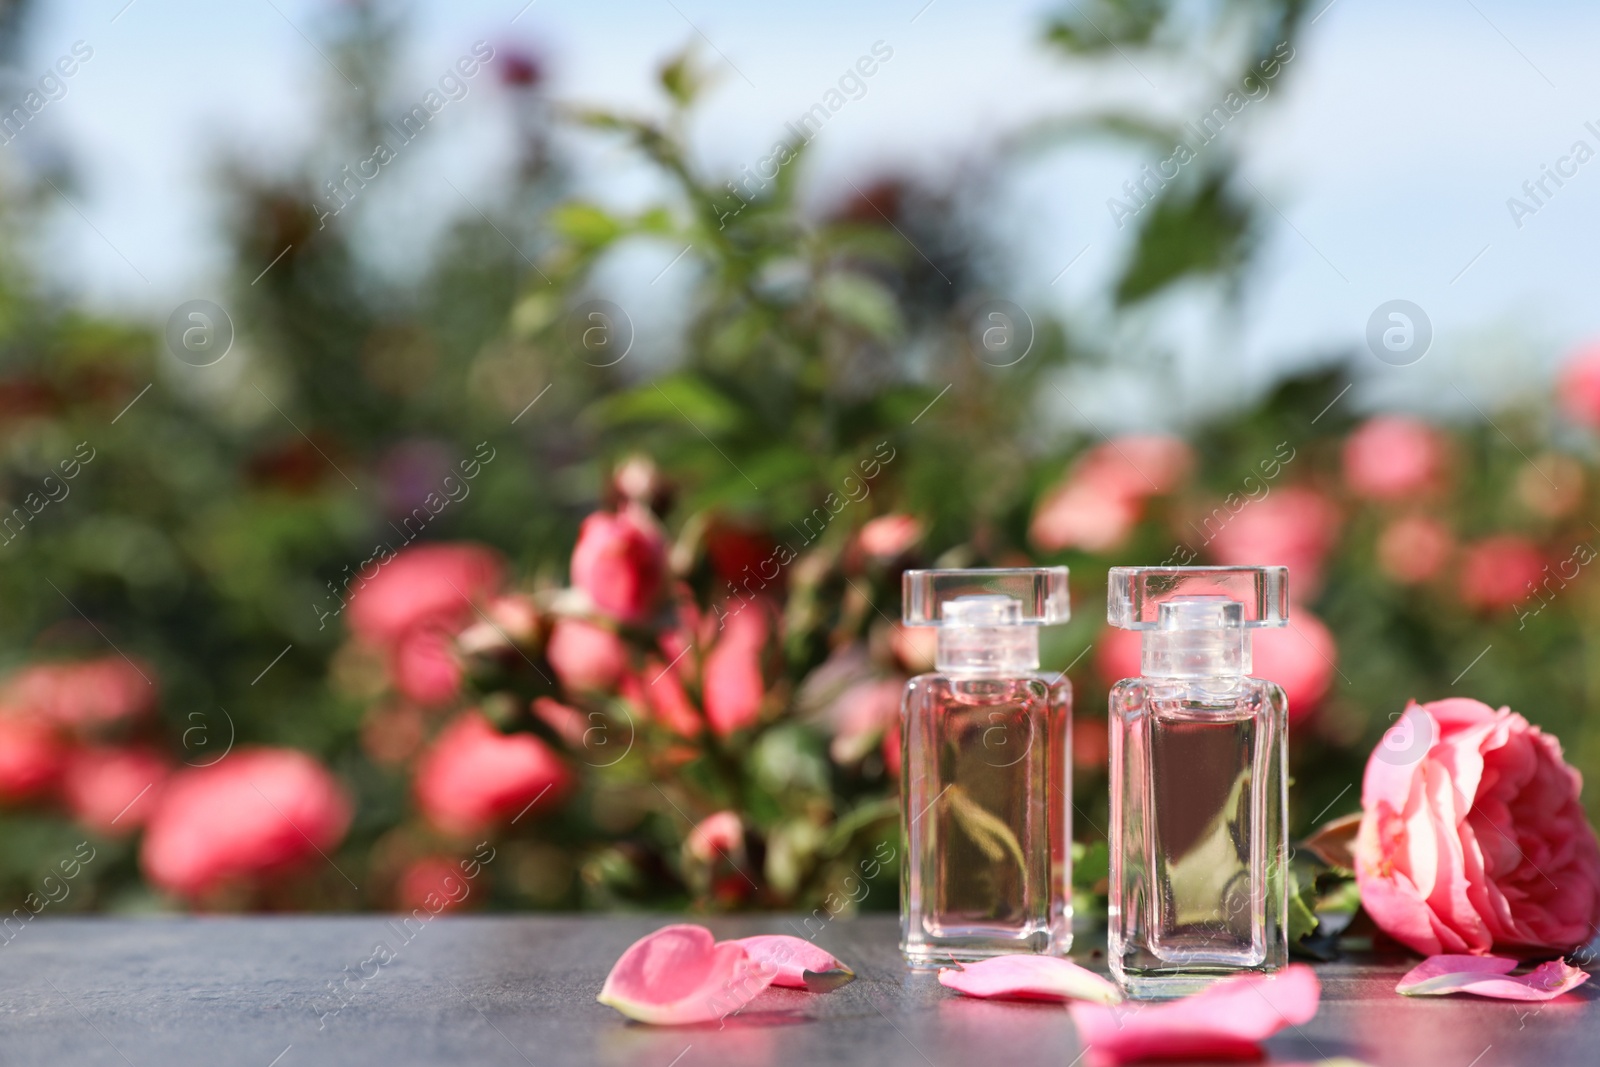 Photo of Bottles with perfume, fresh rose and petals on table against blurred background. Space for text